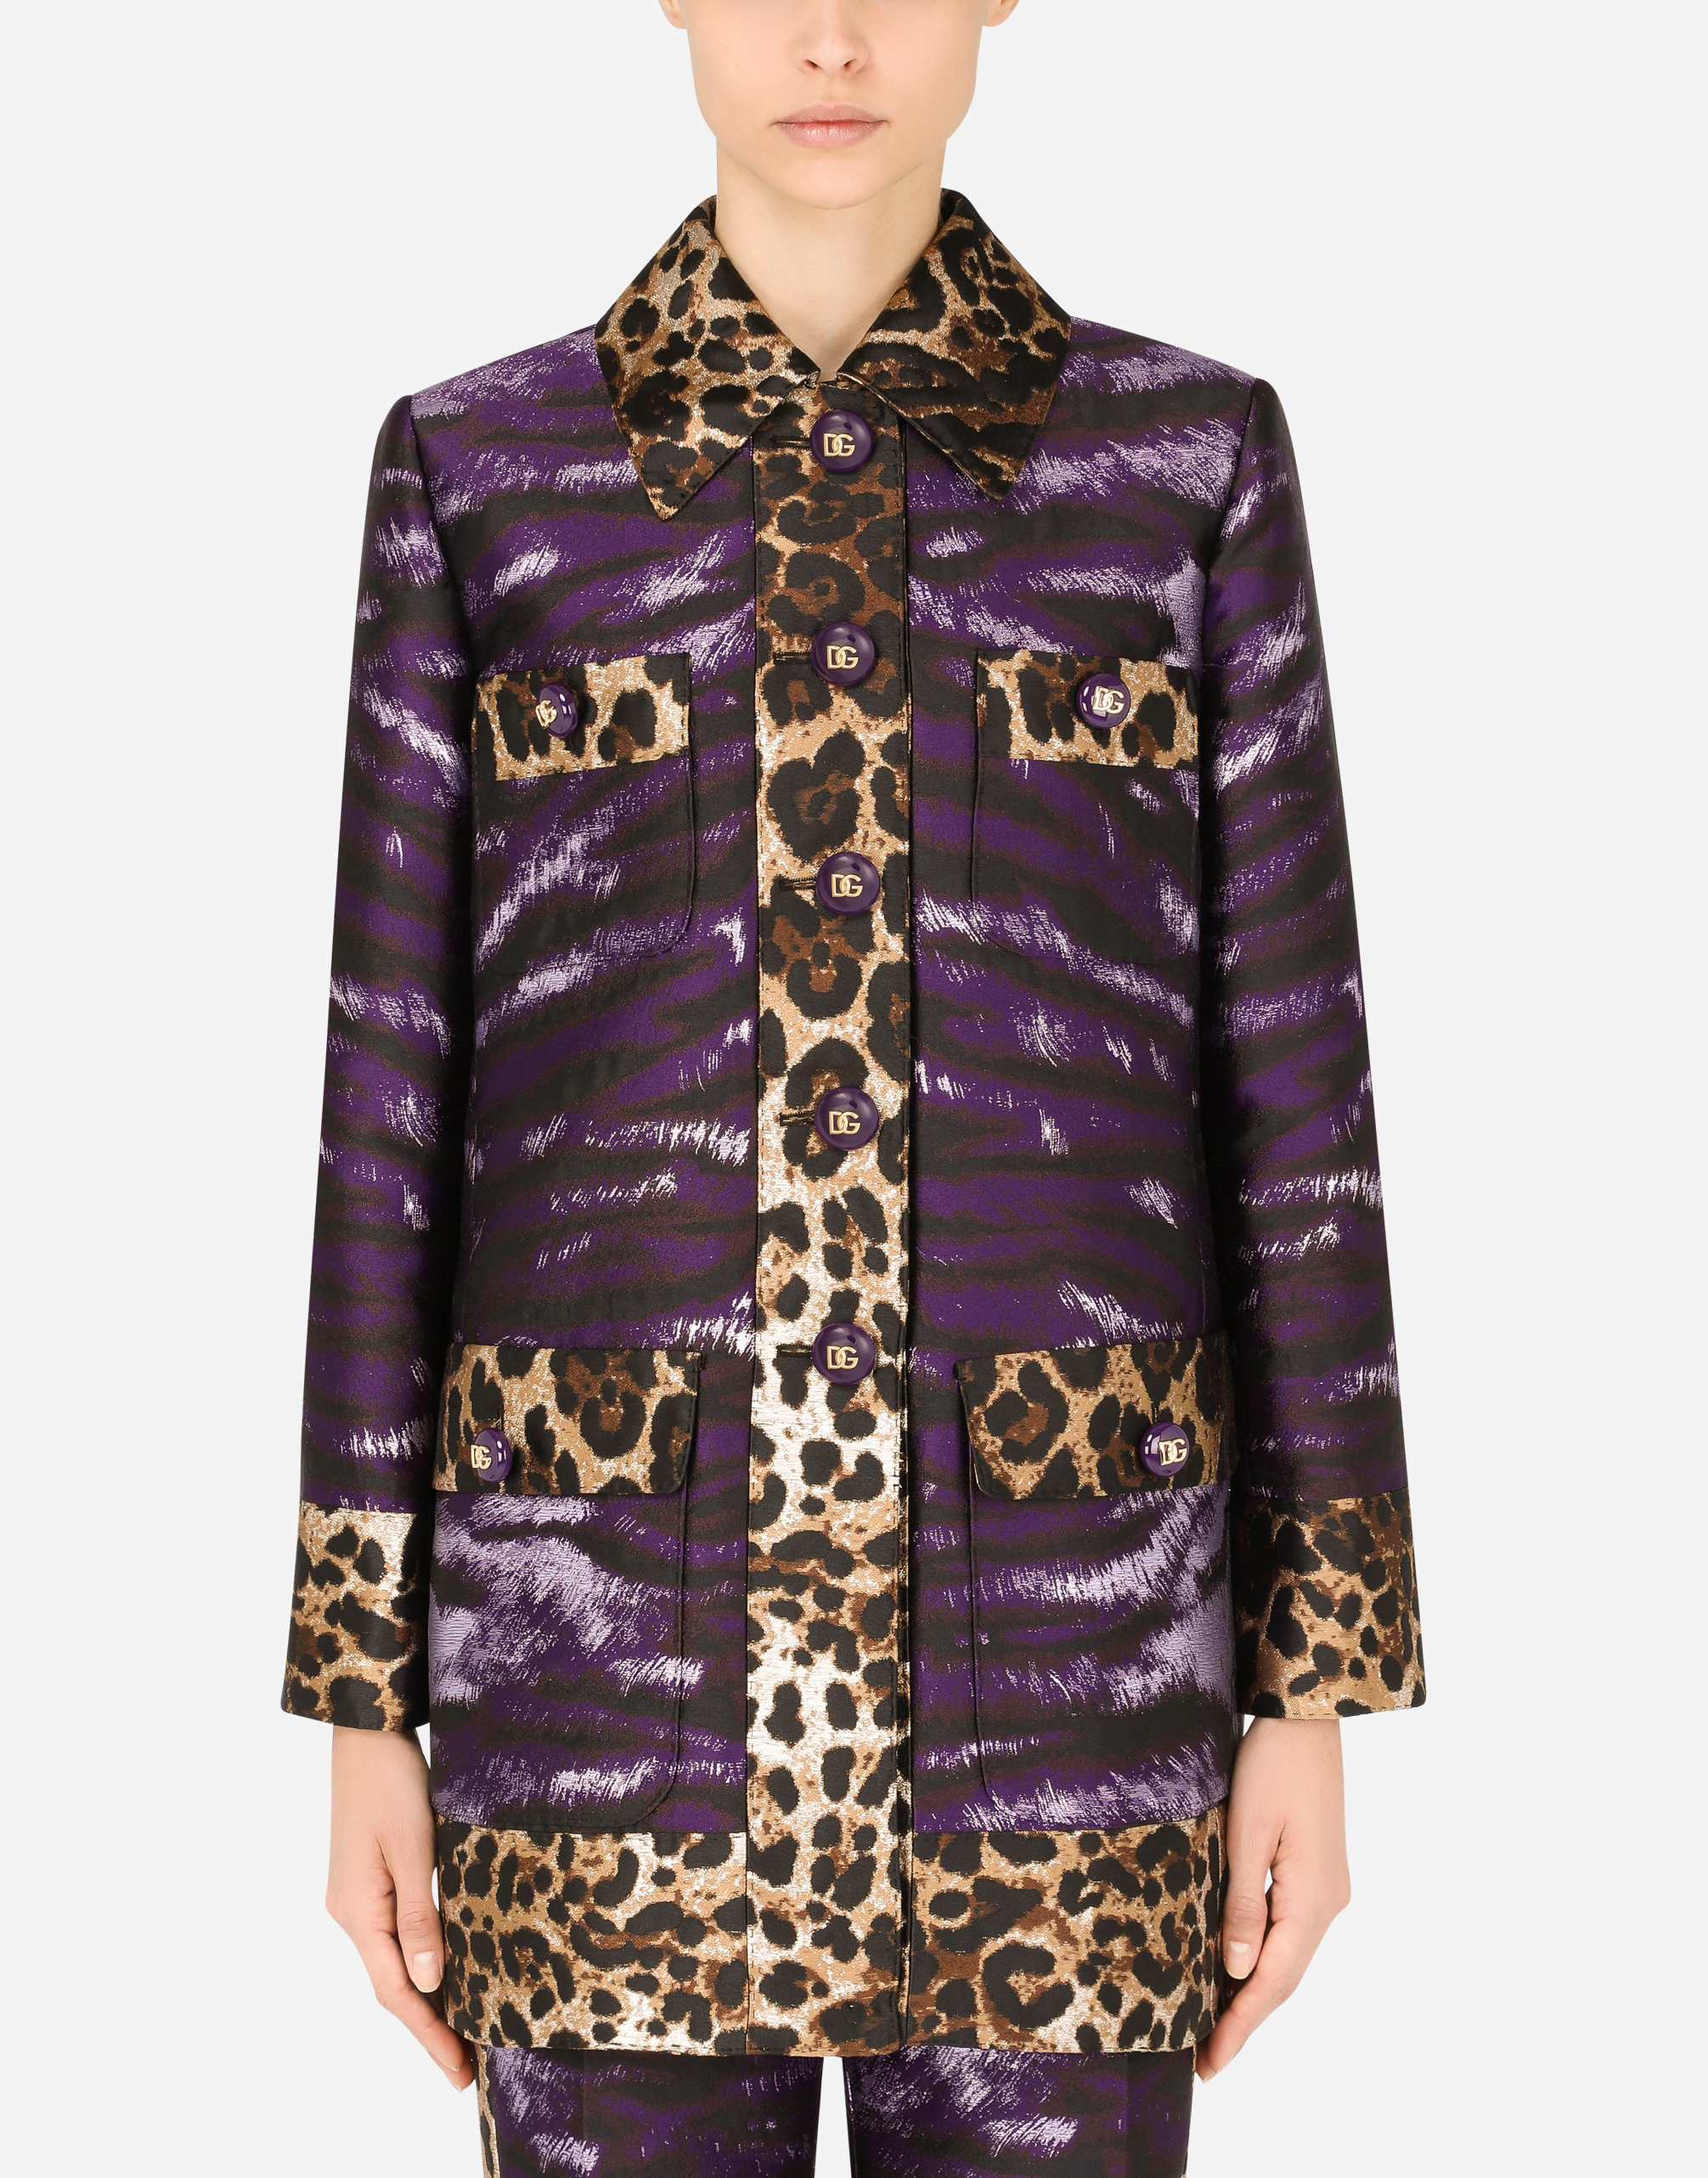 Lamé jacquard jacket with tiger print in Multicolor